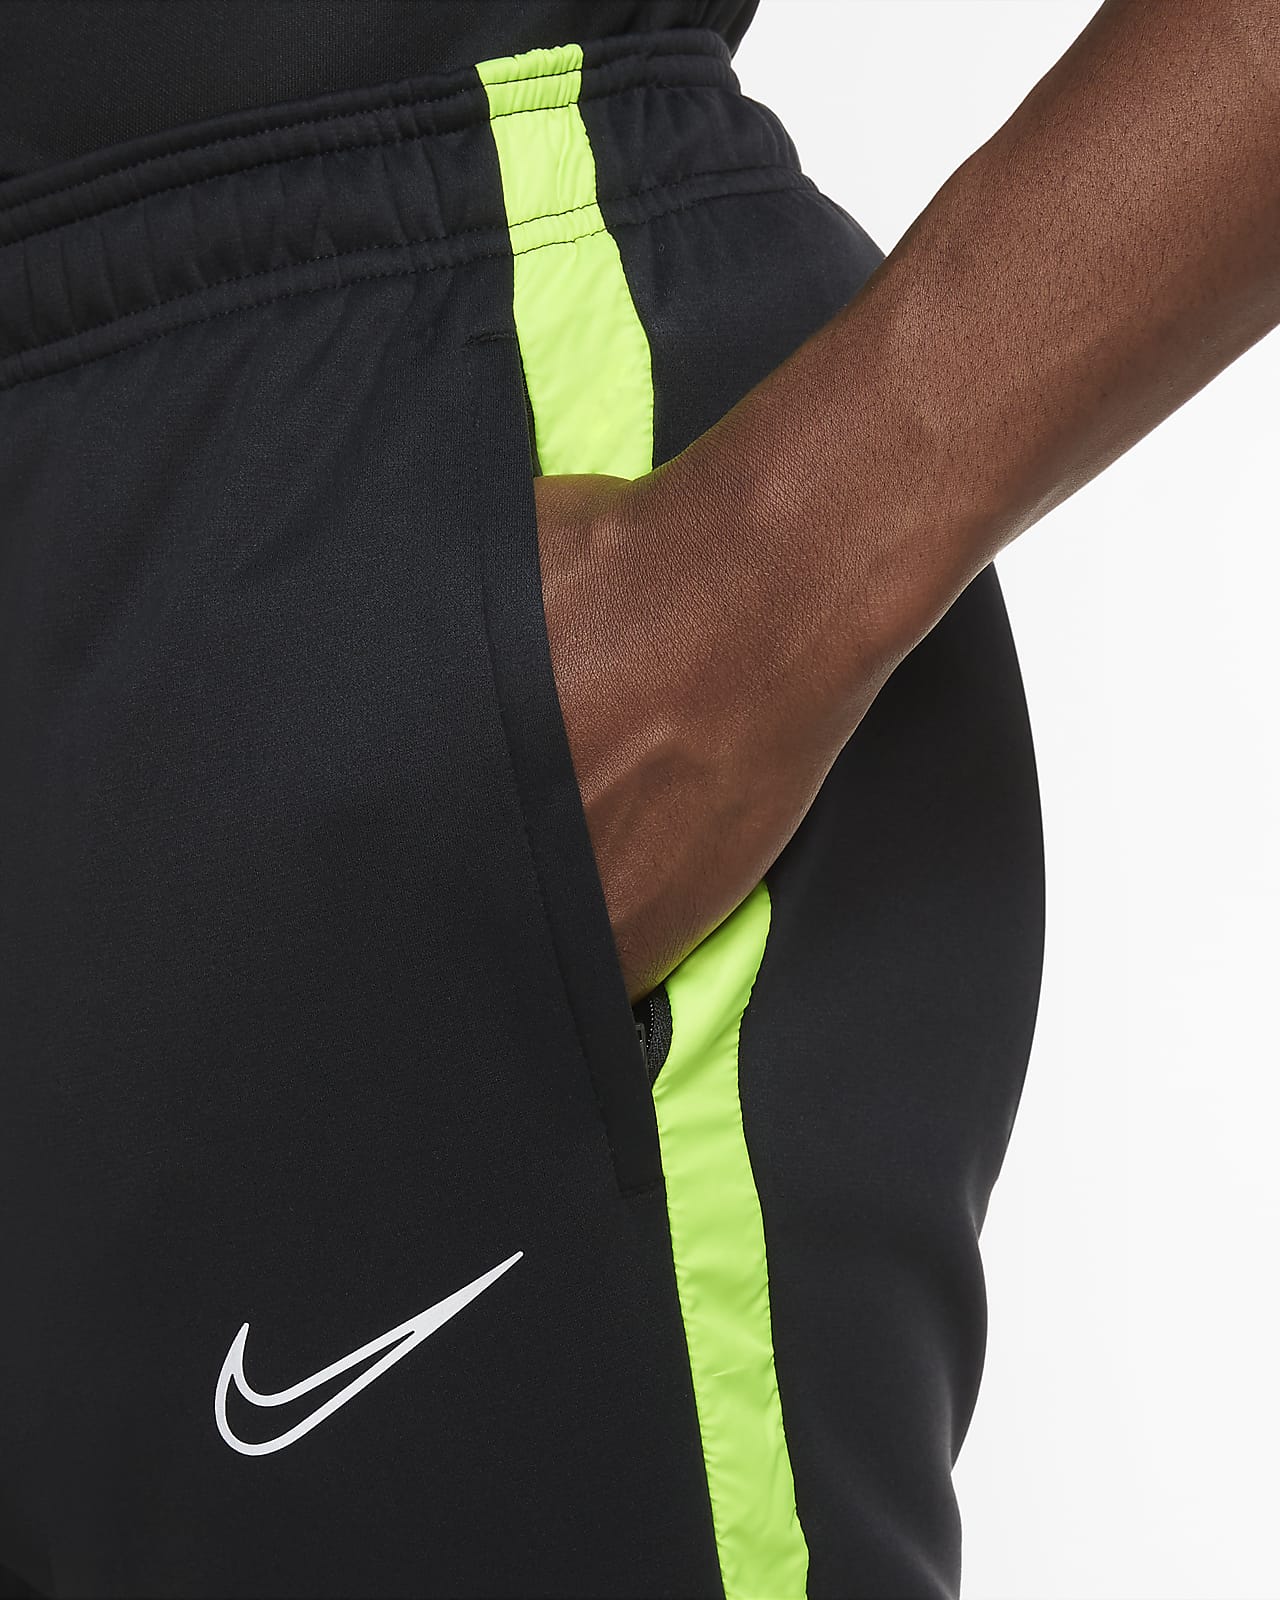 men's nike therma academy soccer training pants